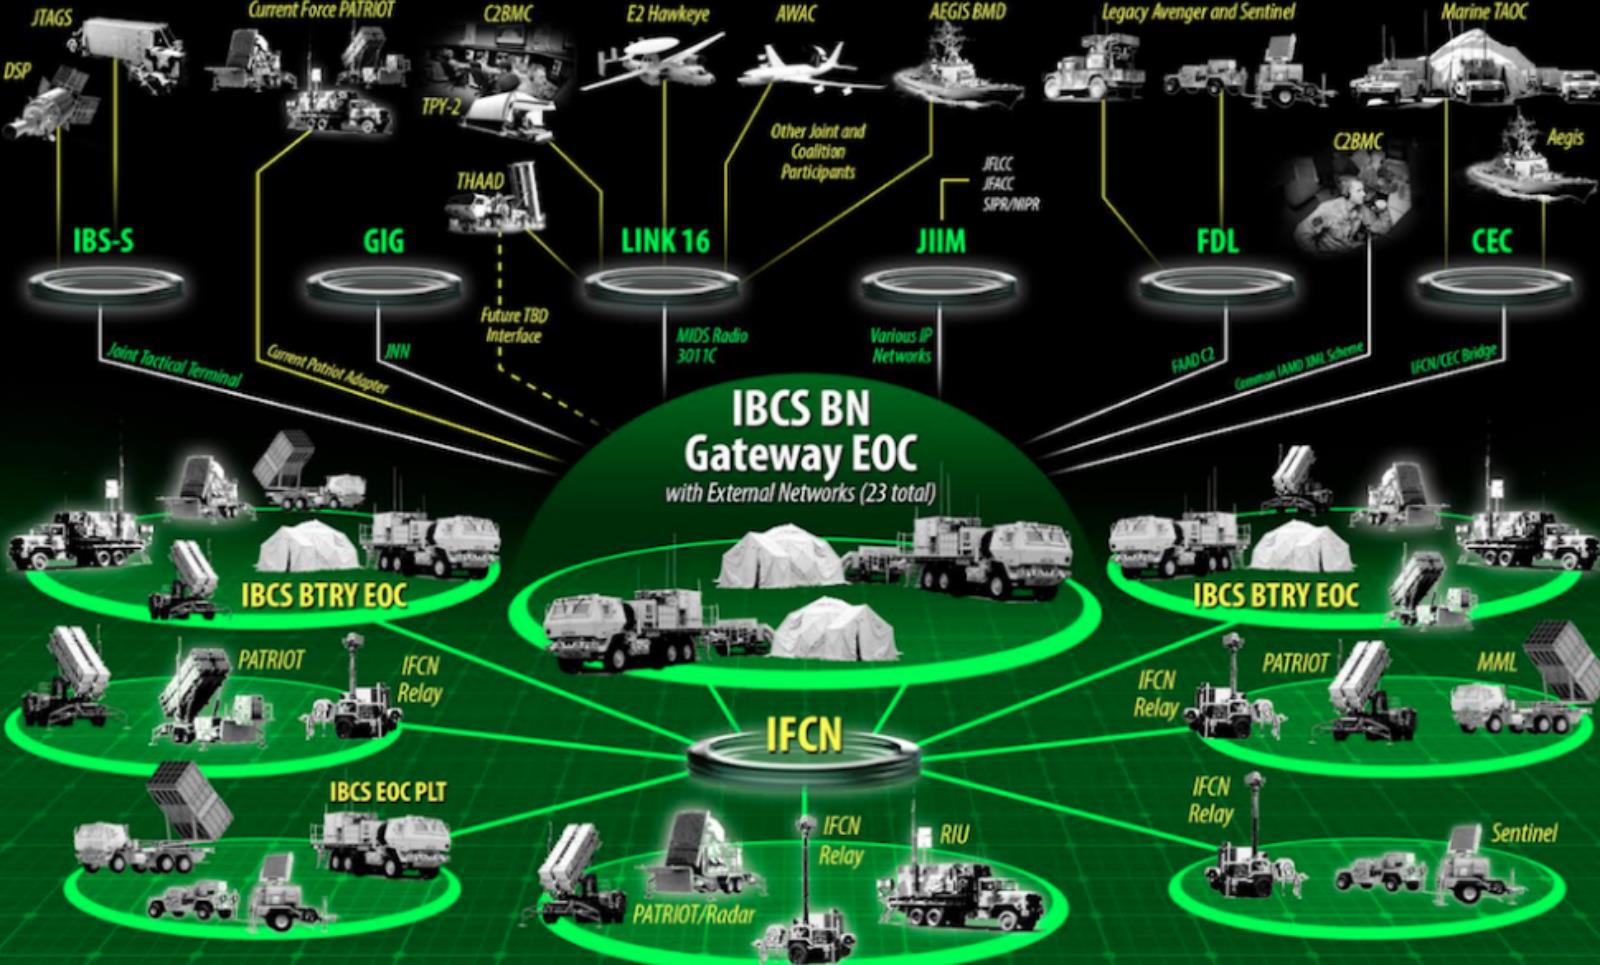 The US military is allocating $ 1.4 billion to the new IBCS command system